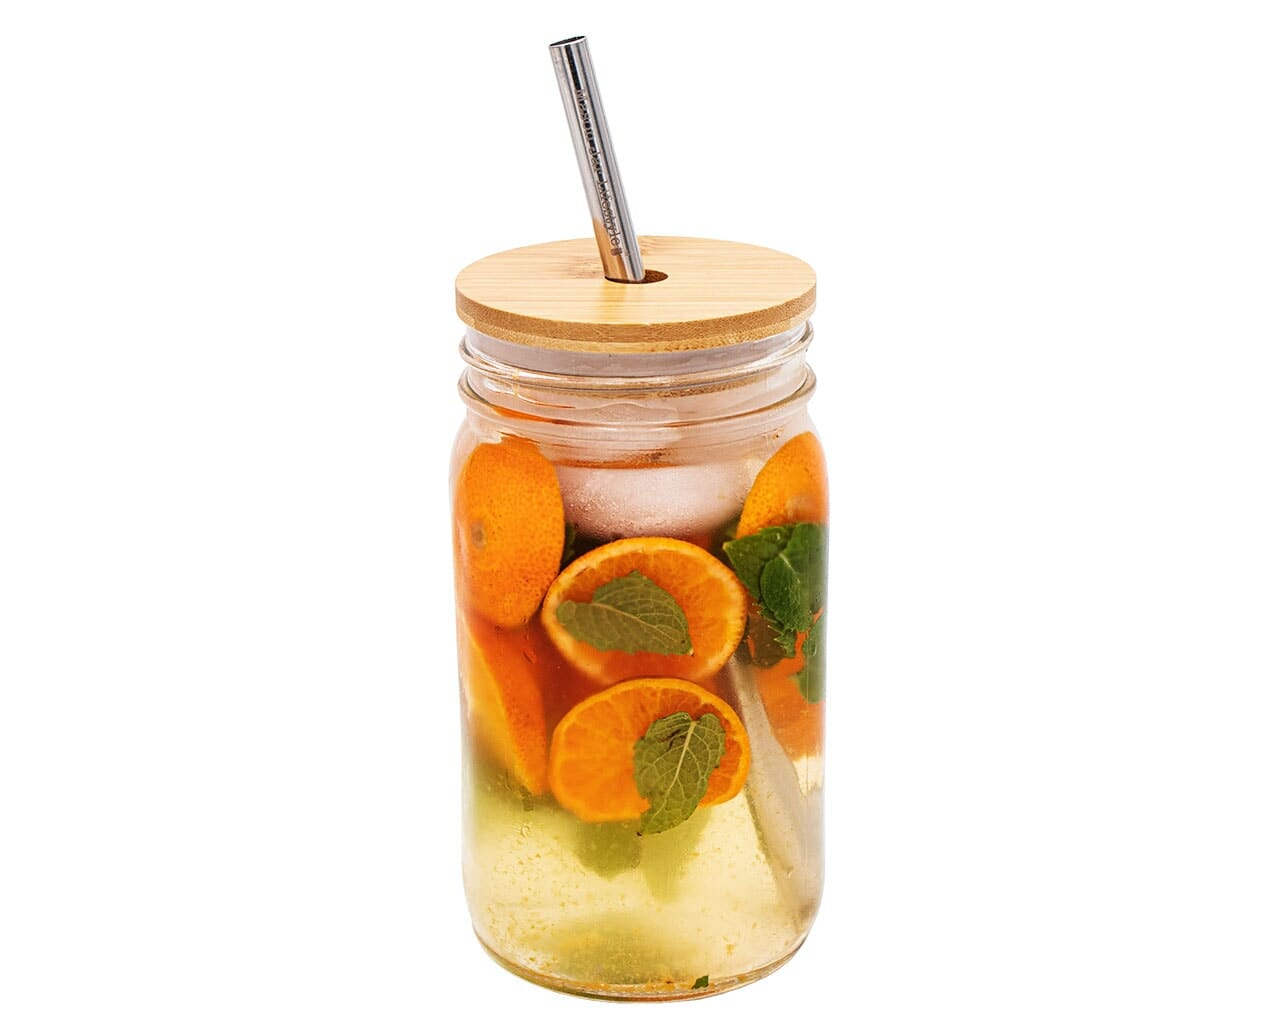 mason-jar-lifestyle-bamboo-straw-hole-tumbler-lids-long-stainless-steel-wide-mouth-32oz-quart-iced-tea-water